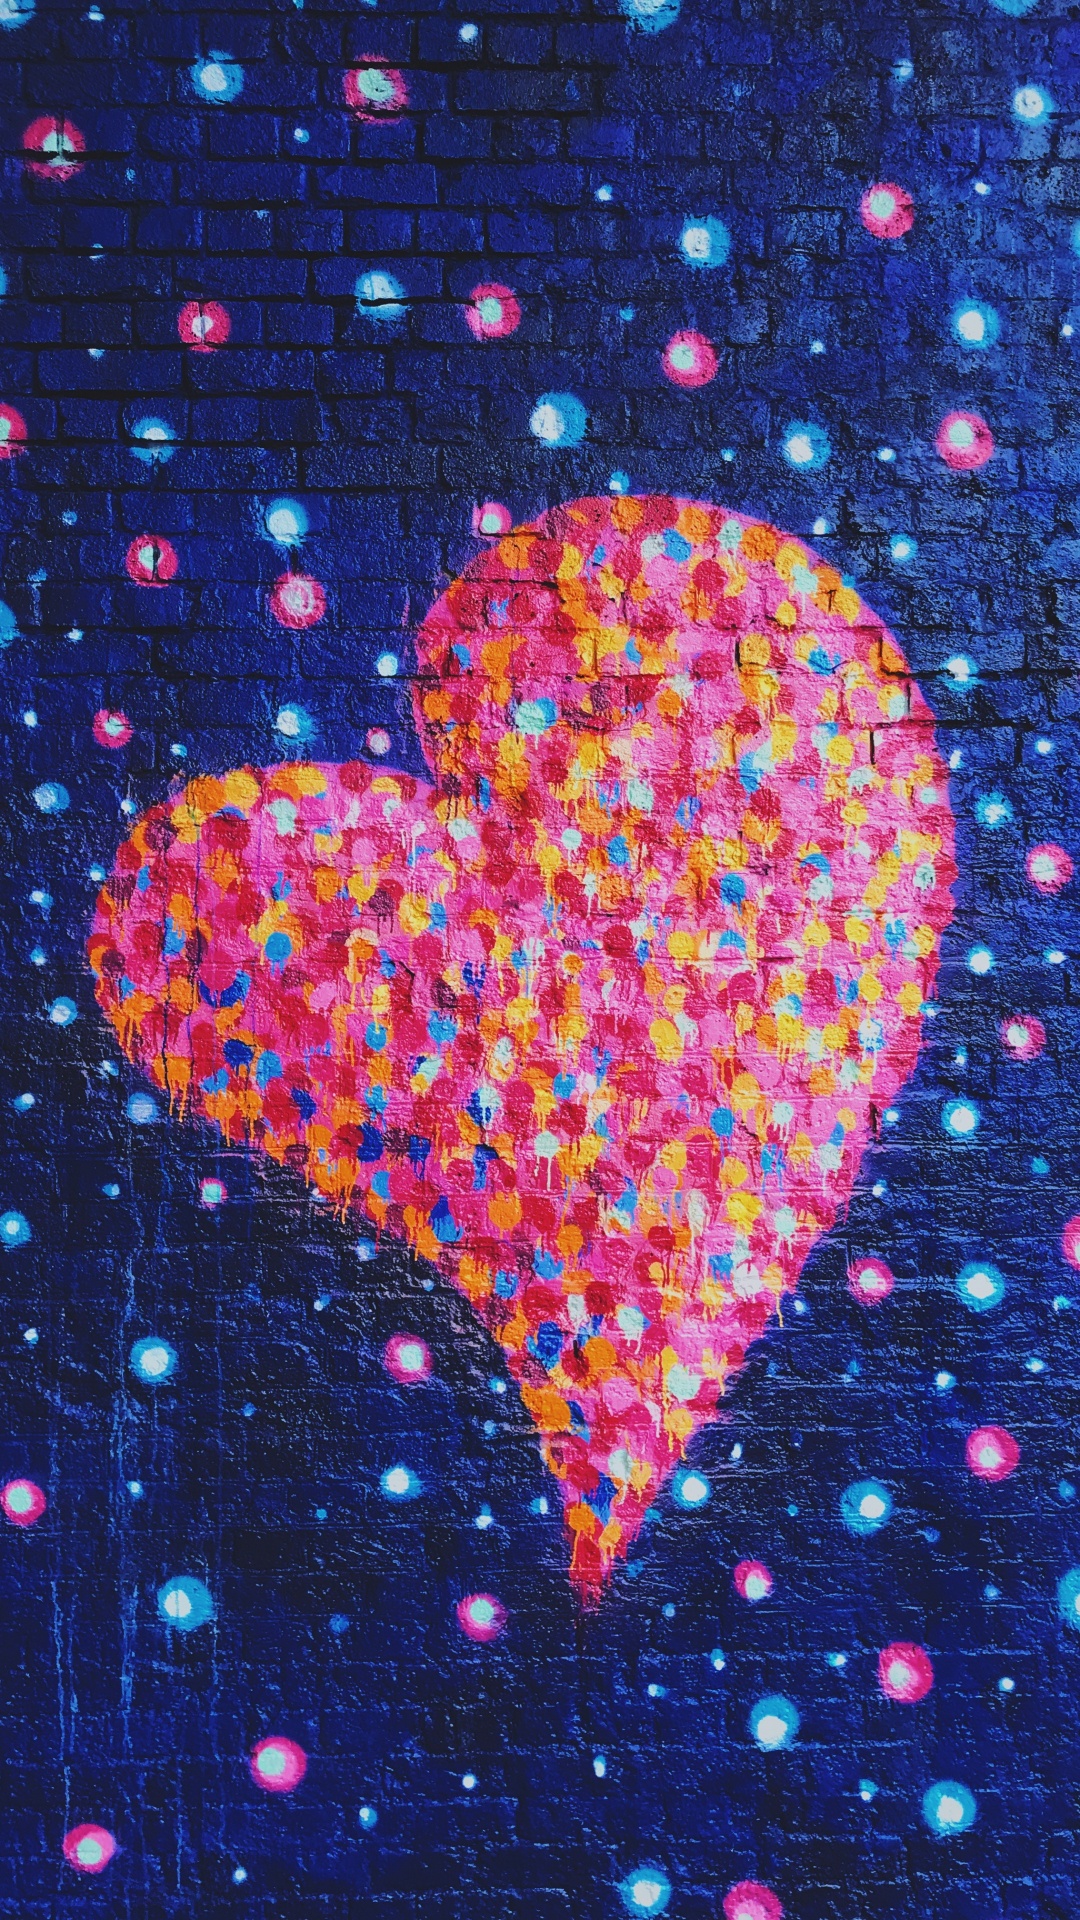 Red Heart With Blue and Pink Hearts Illustration. Wallpaper in 1080x1920 Resolution